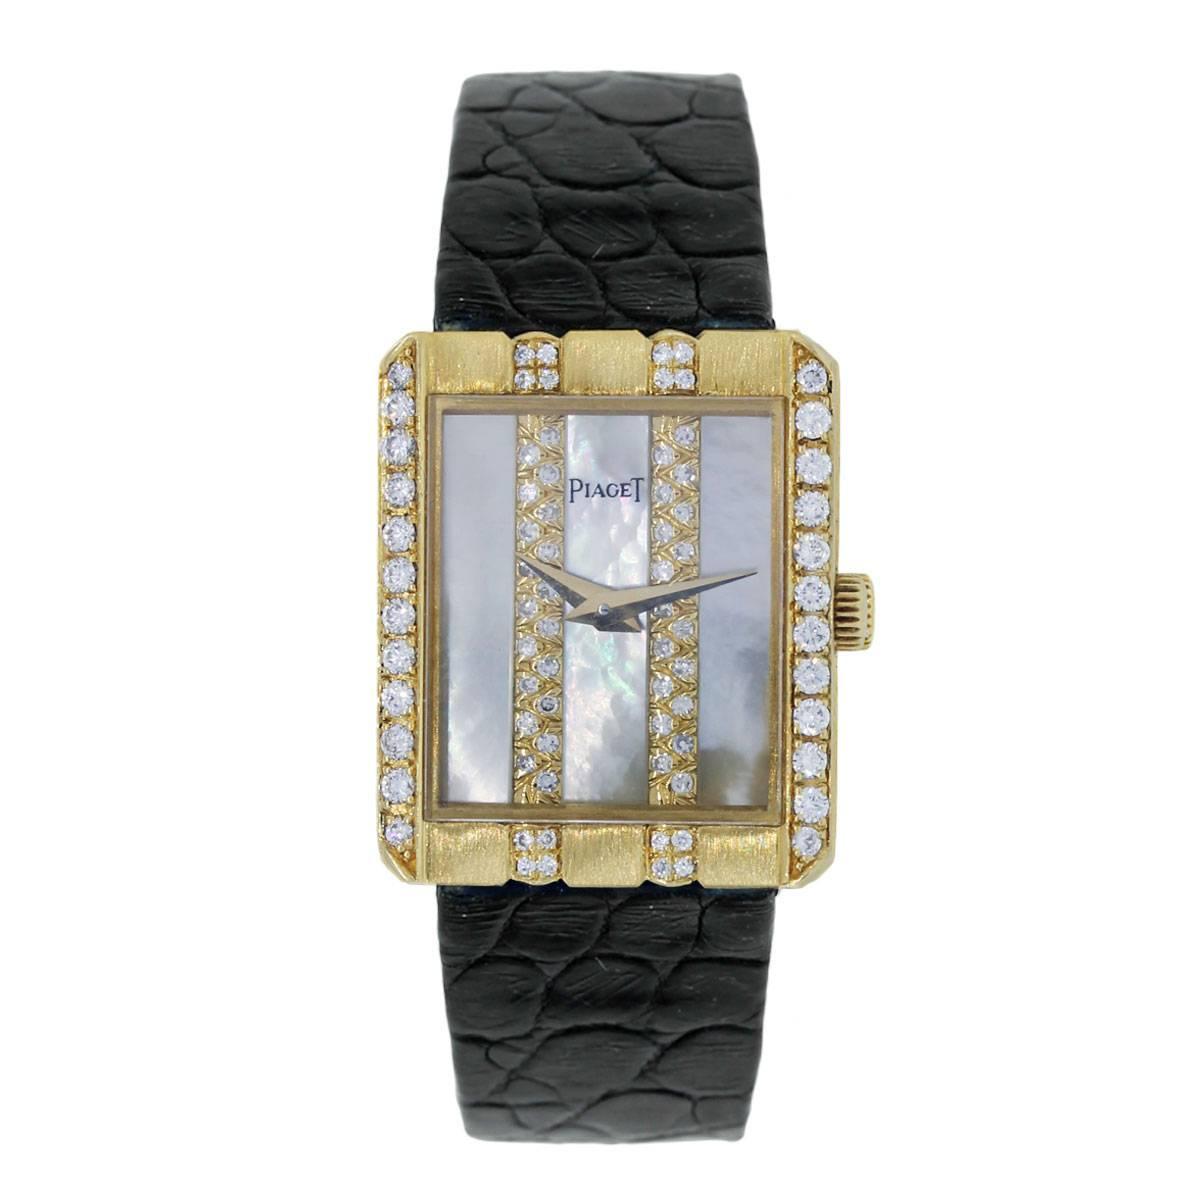 Brand: Piaget
Style: 18k Yellow Gold Diamond MOP Dial on Leather Watch
Case Material: 18k Yellow Gold
Case Diameter: 19mm X 23mm
Bezel: Round Brilliant Diamond bezel
Dial: Mother of Pearl Diamond Dial with gold hands
Bracelet: Black Leather
Size: